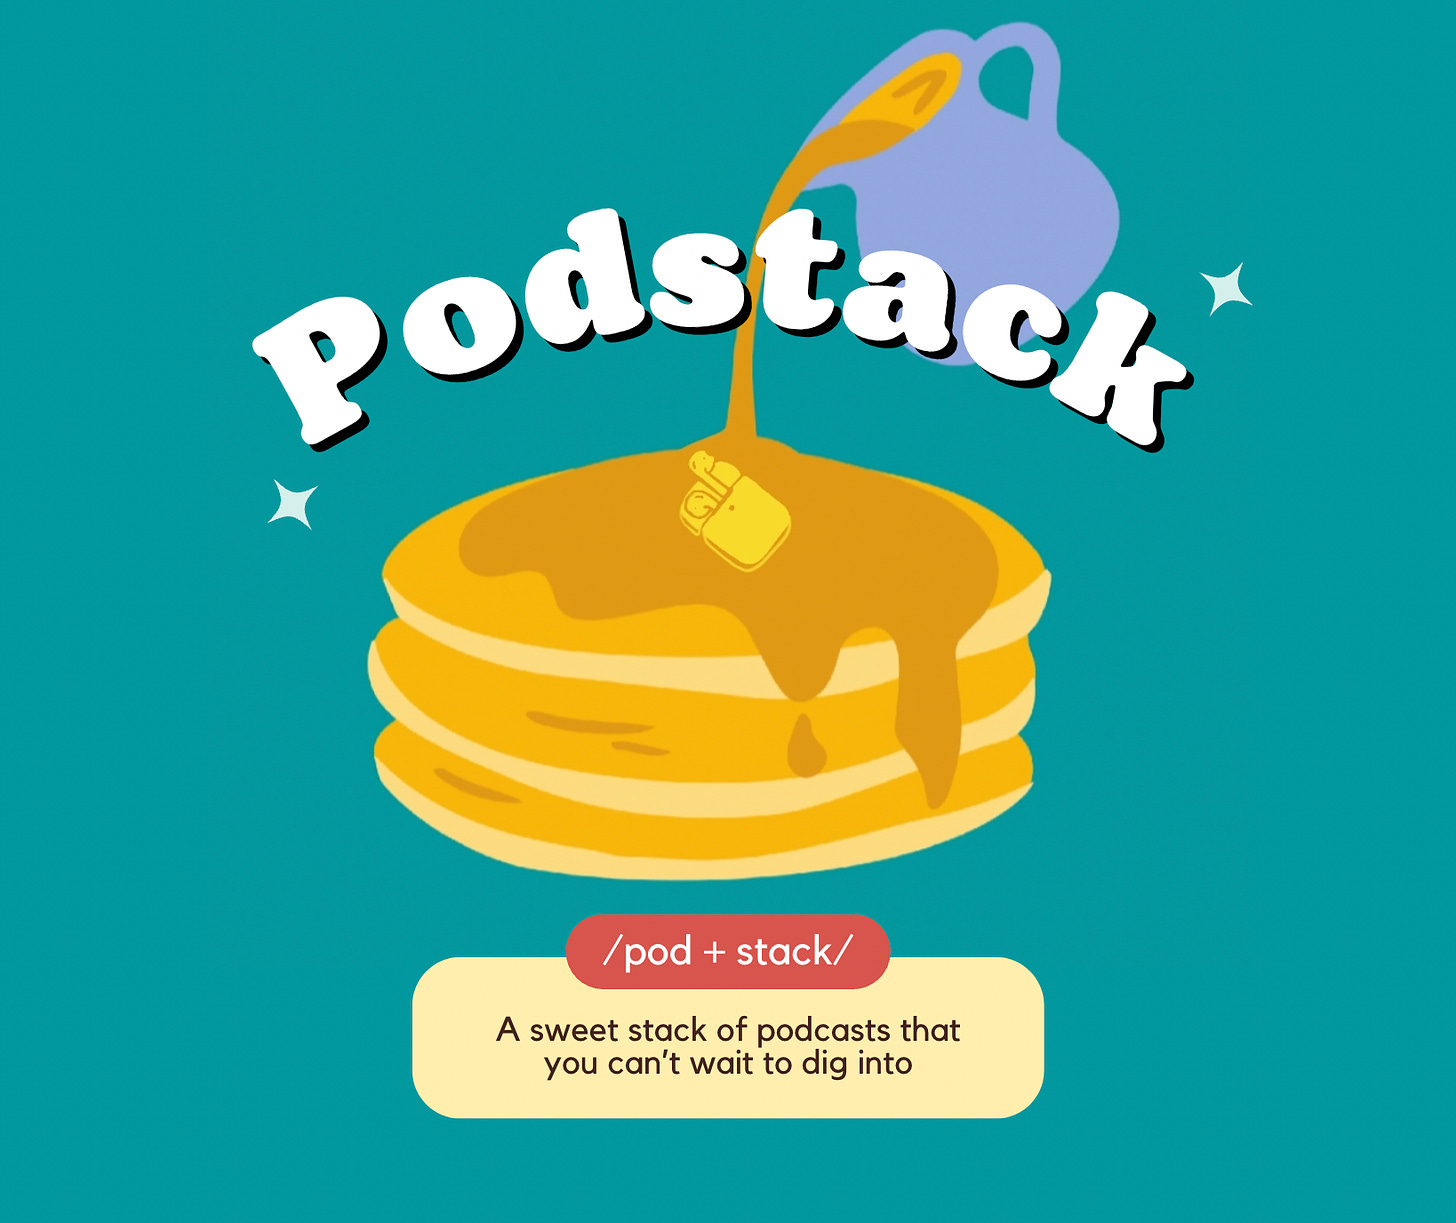 An illustration of a stack of pancakes is in the background with the title Podstack in front. Below is the defintion of a podstack, which is defined as a sweet stack of podcasts that you can't wait to dig into.